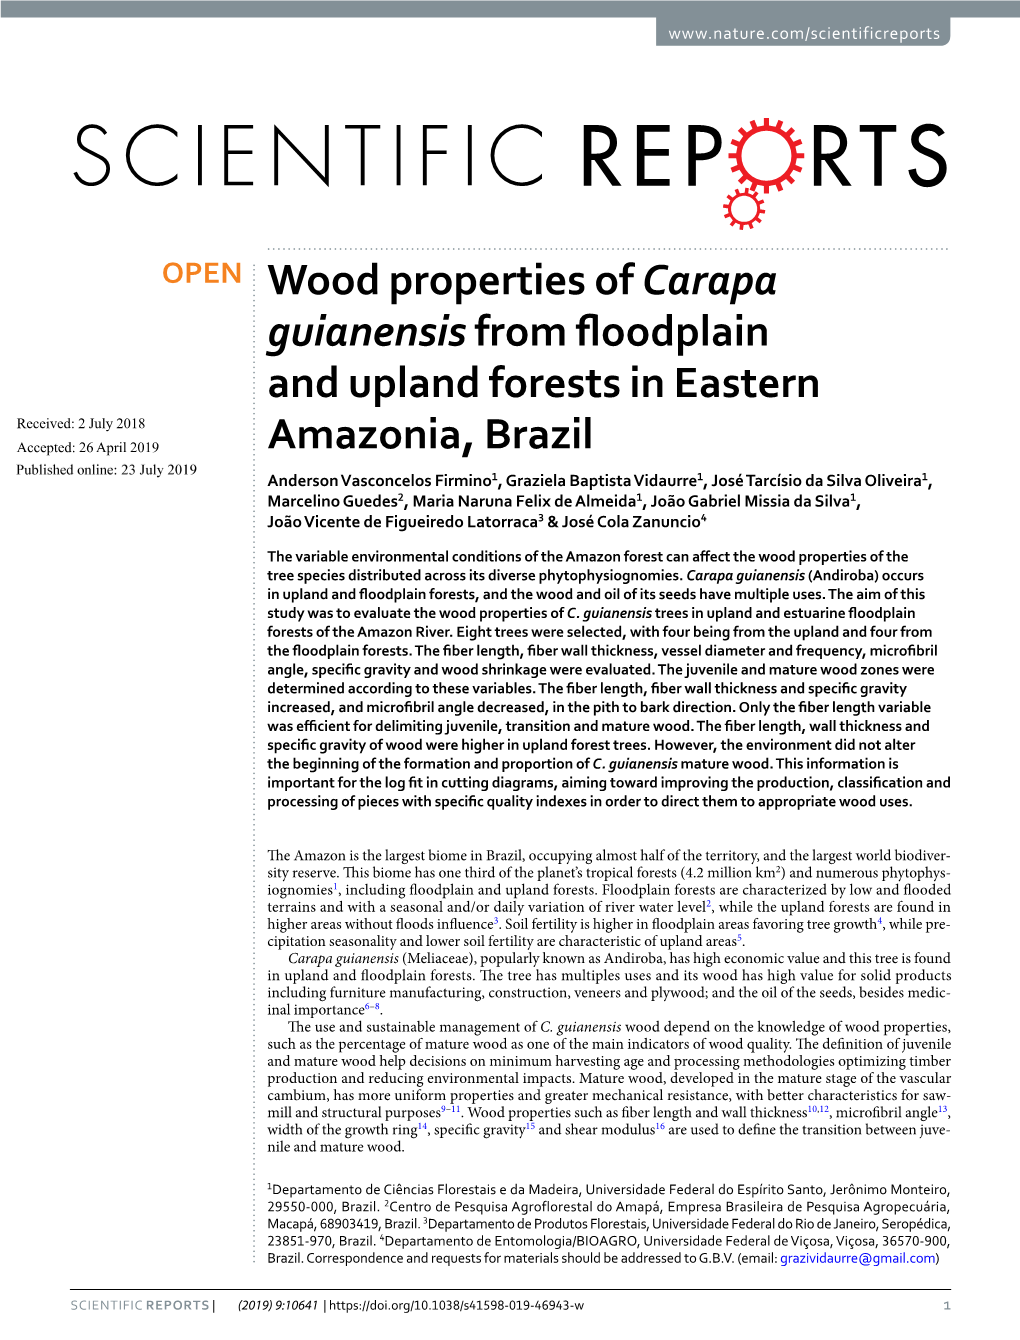 Wood Properties of Carapa Guianensis from Floodplain And